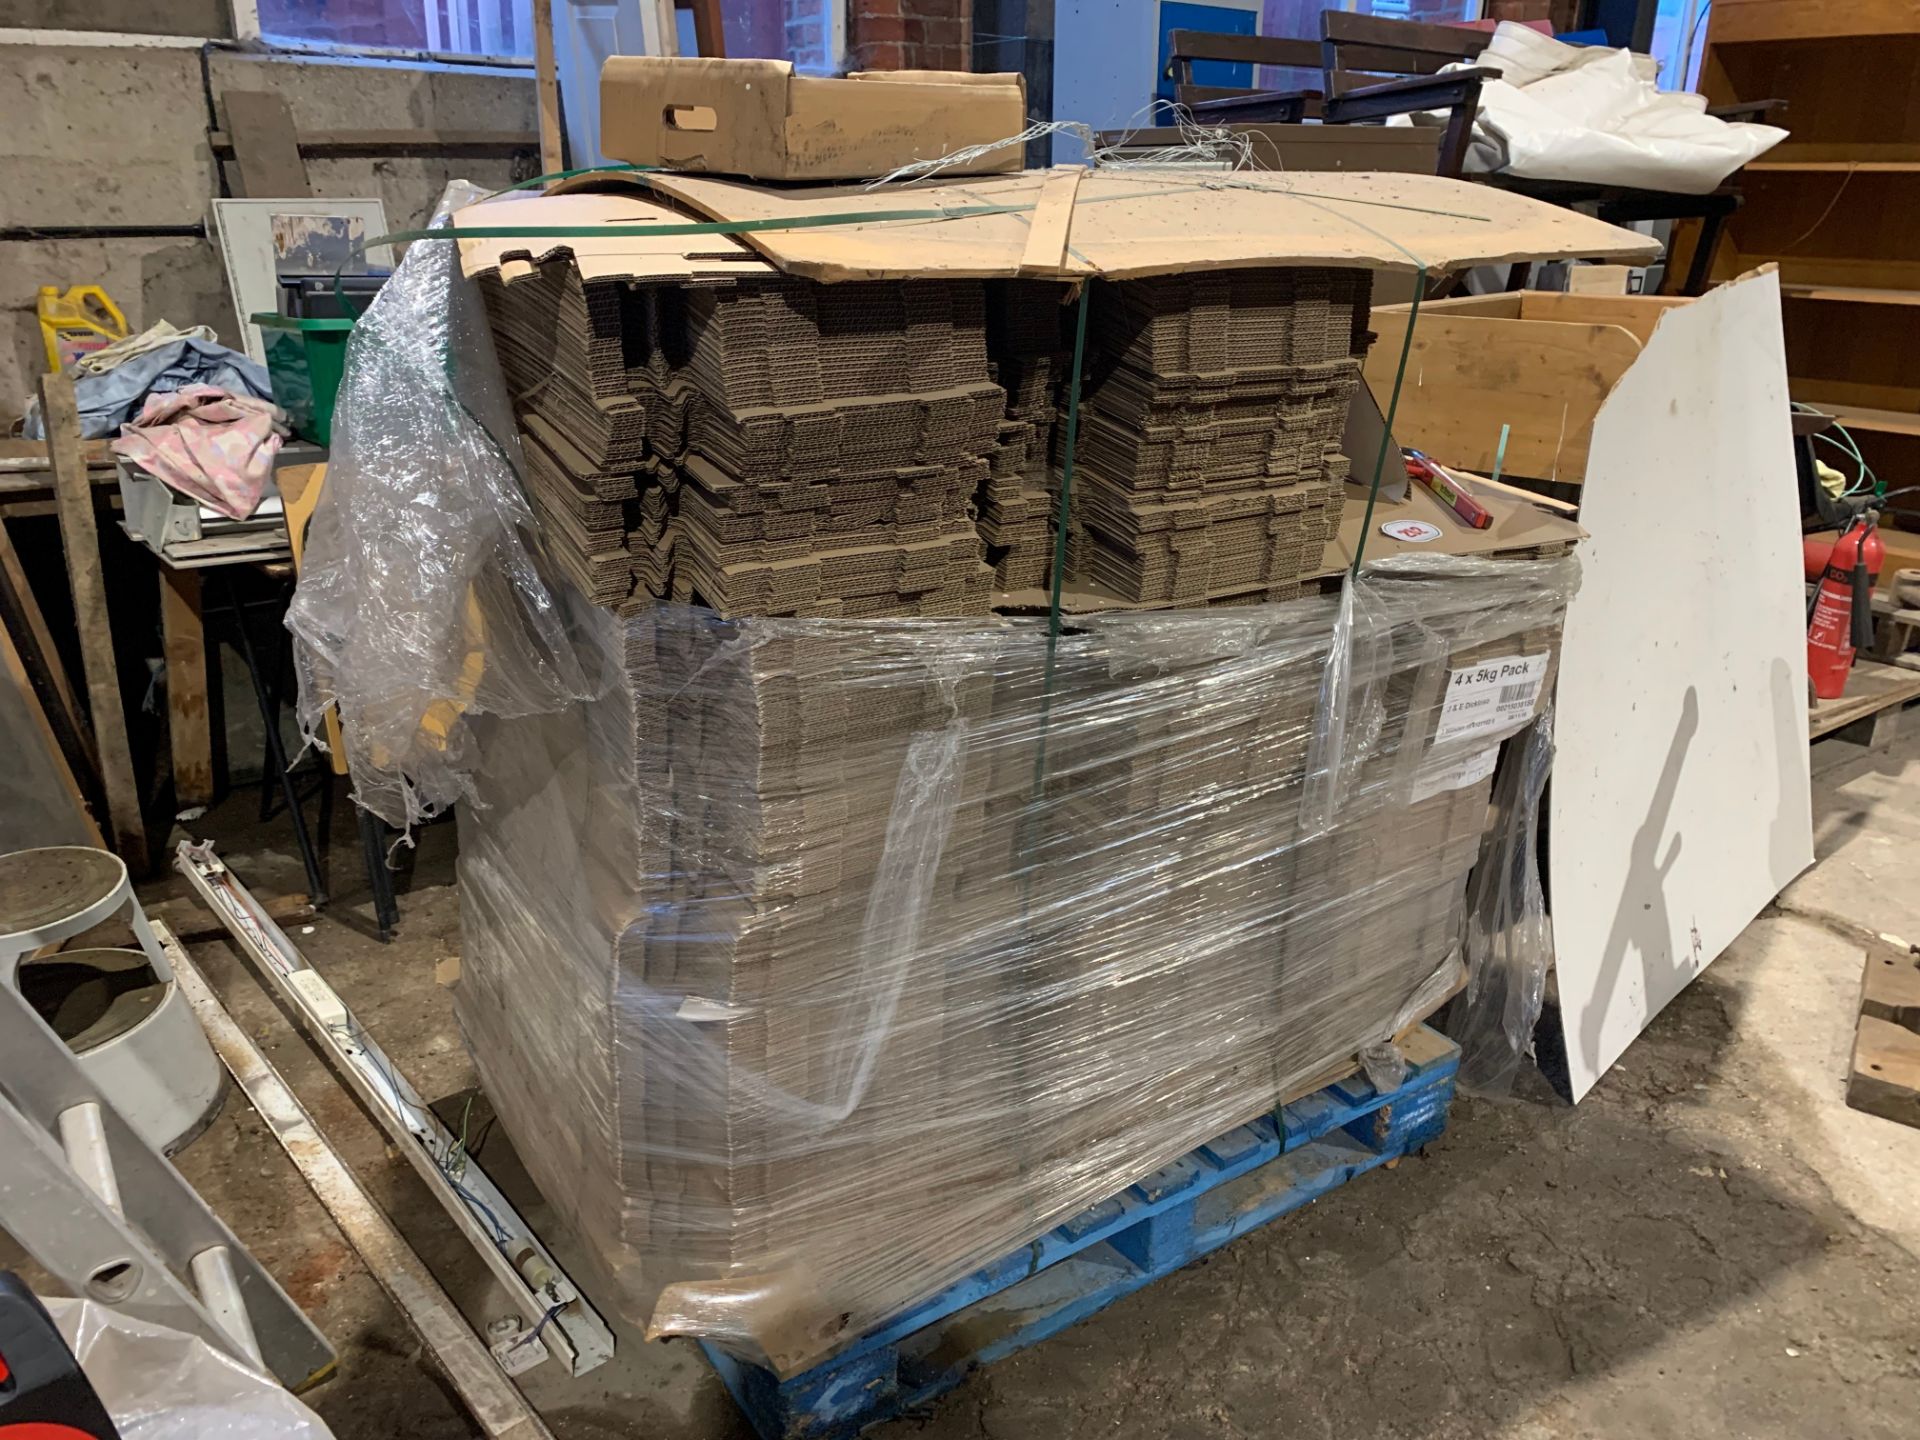 Pallet of flat pack cardboard boxes